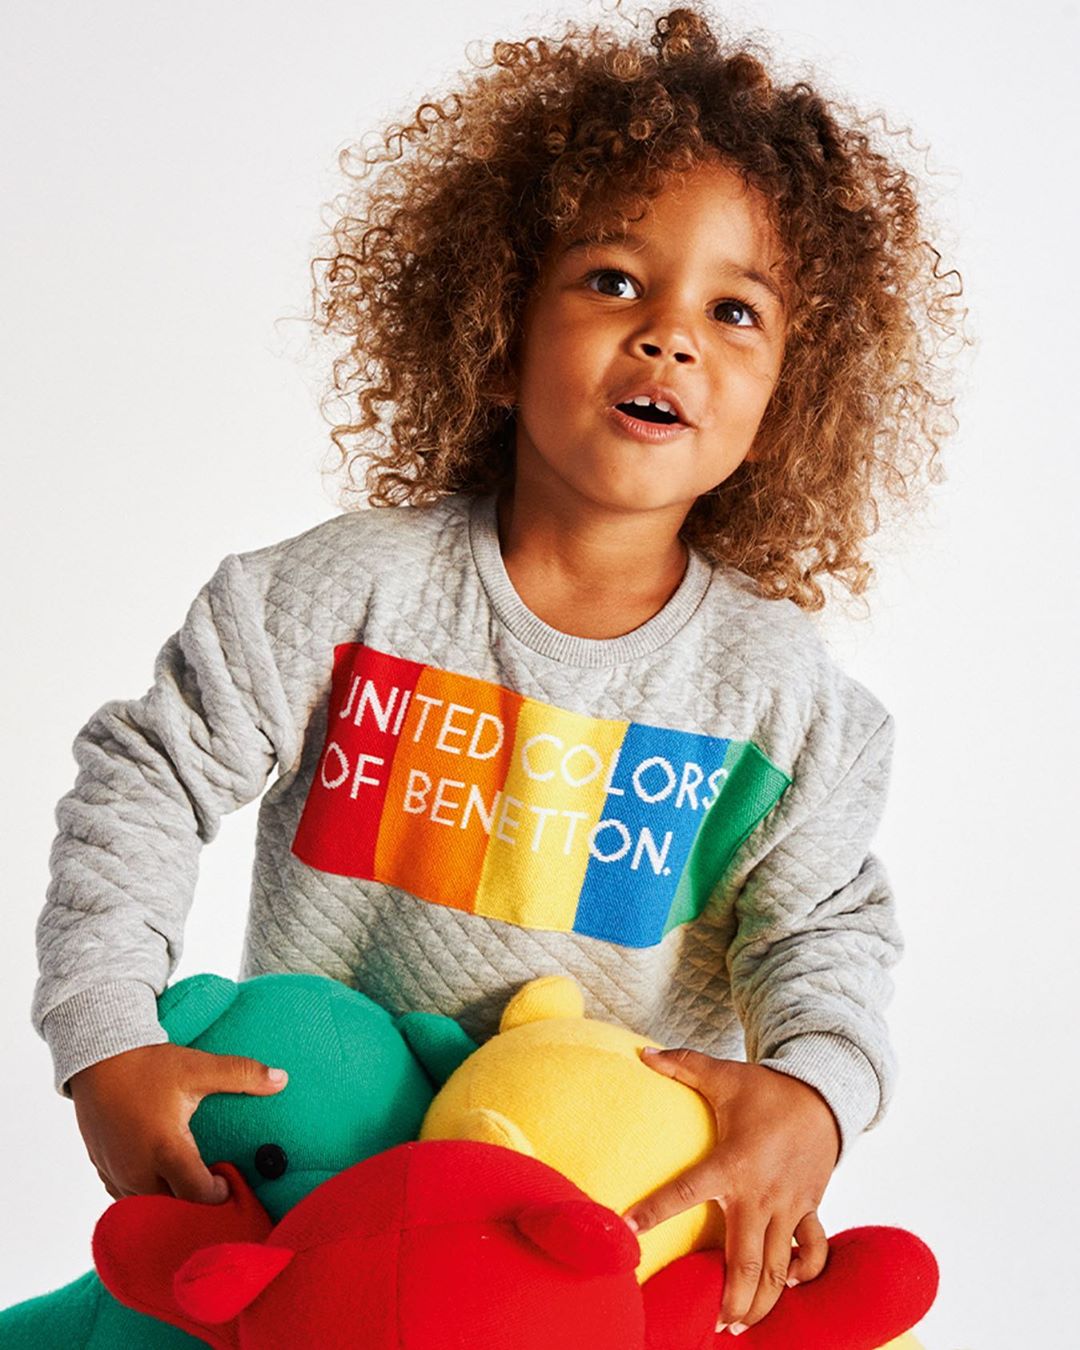 United Colors of Benetton - Need some invisible touch?
#Benetton #FW20 @jcdecastelbajac